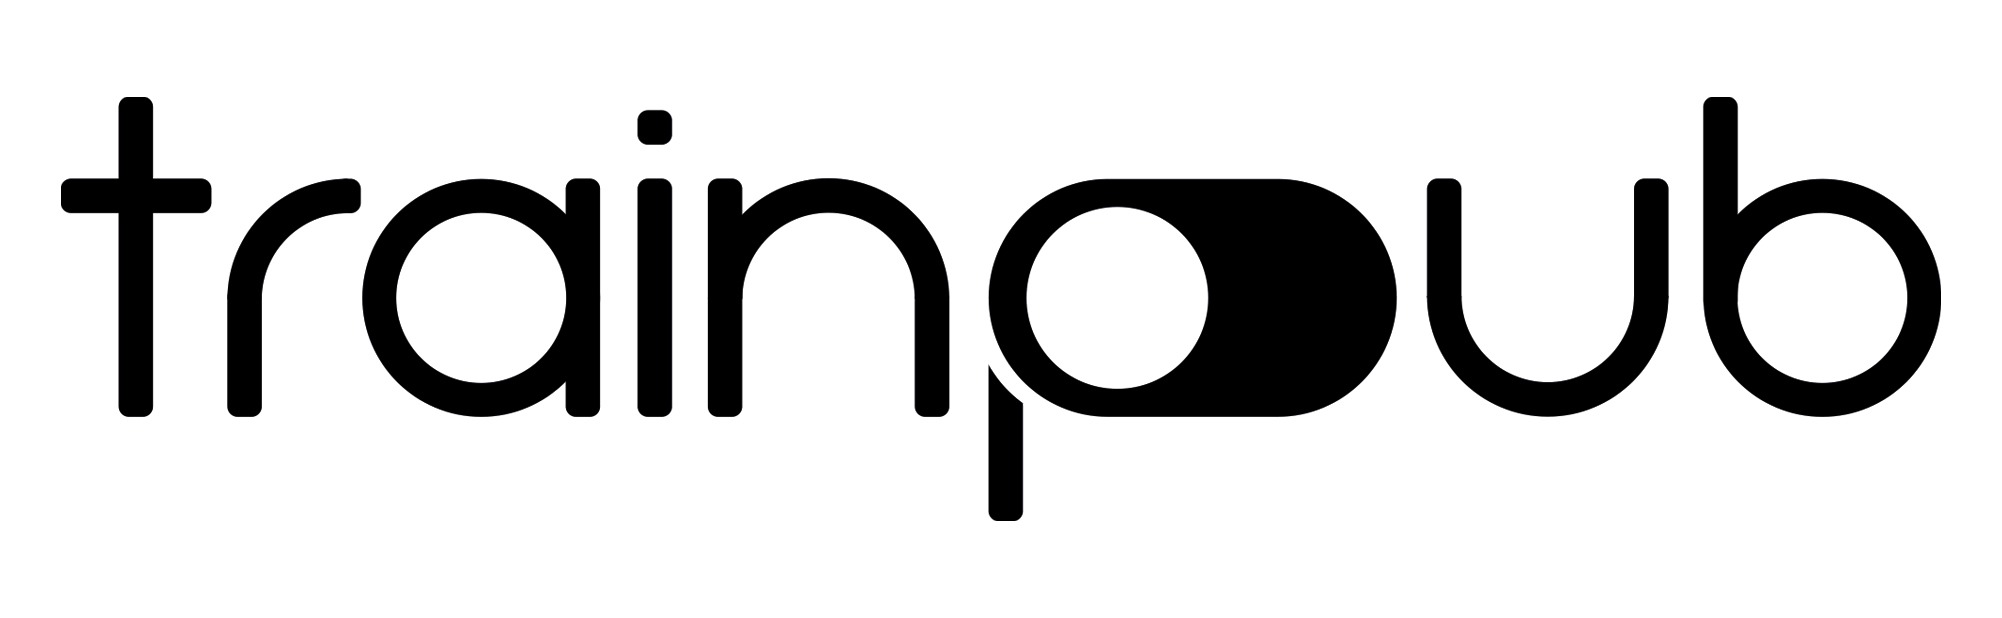 The logo with an ON/OFF toggle in the letter "P". An offer to switch online was behind this idea.